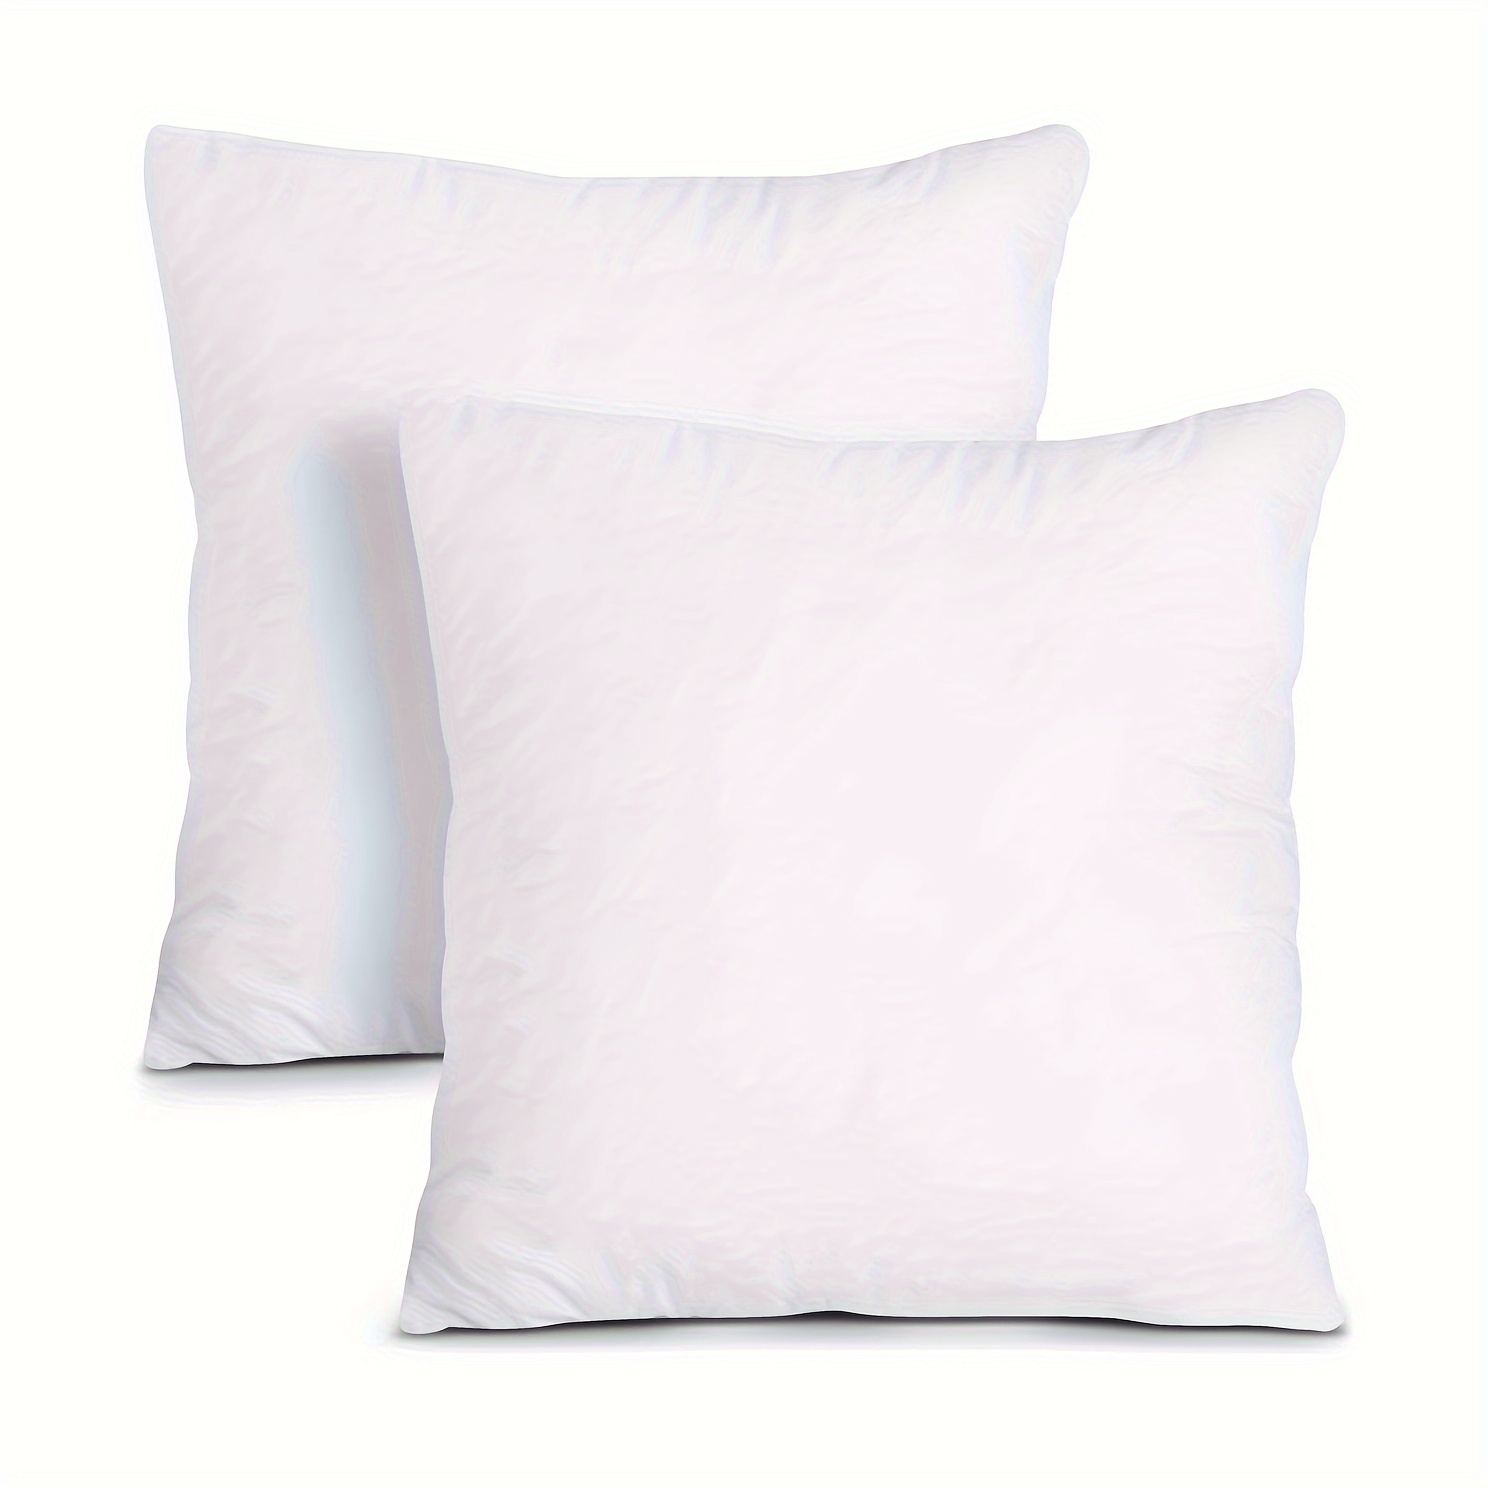 

2pcs Throw Pillow Inserts, Throw Pillow Cores, Square 18"x18" Inches, Bed And Couch Pillows, Sofa Pillows, Decorative Pillows, Skin Friendly, White